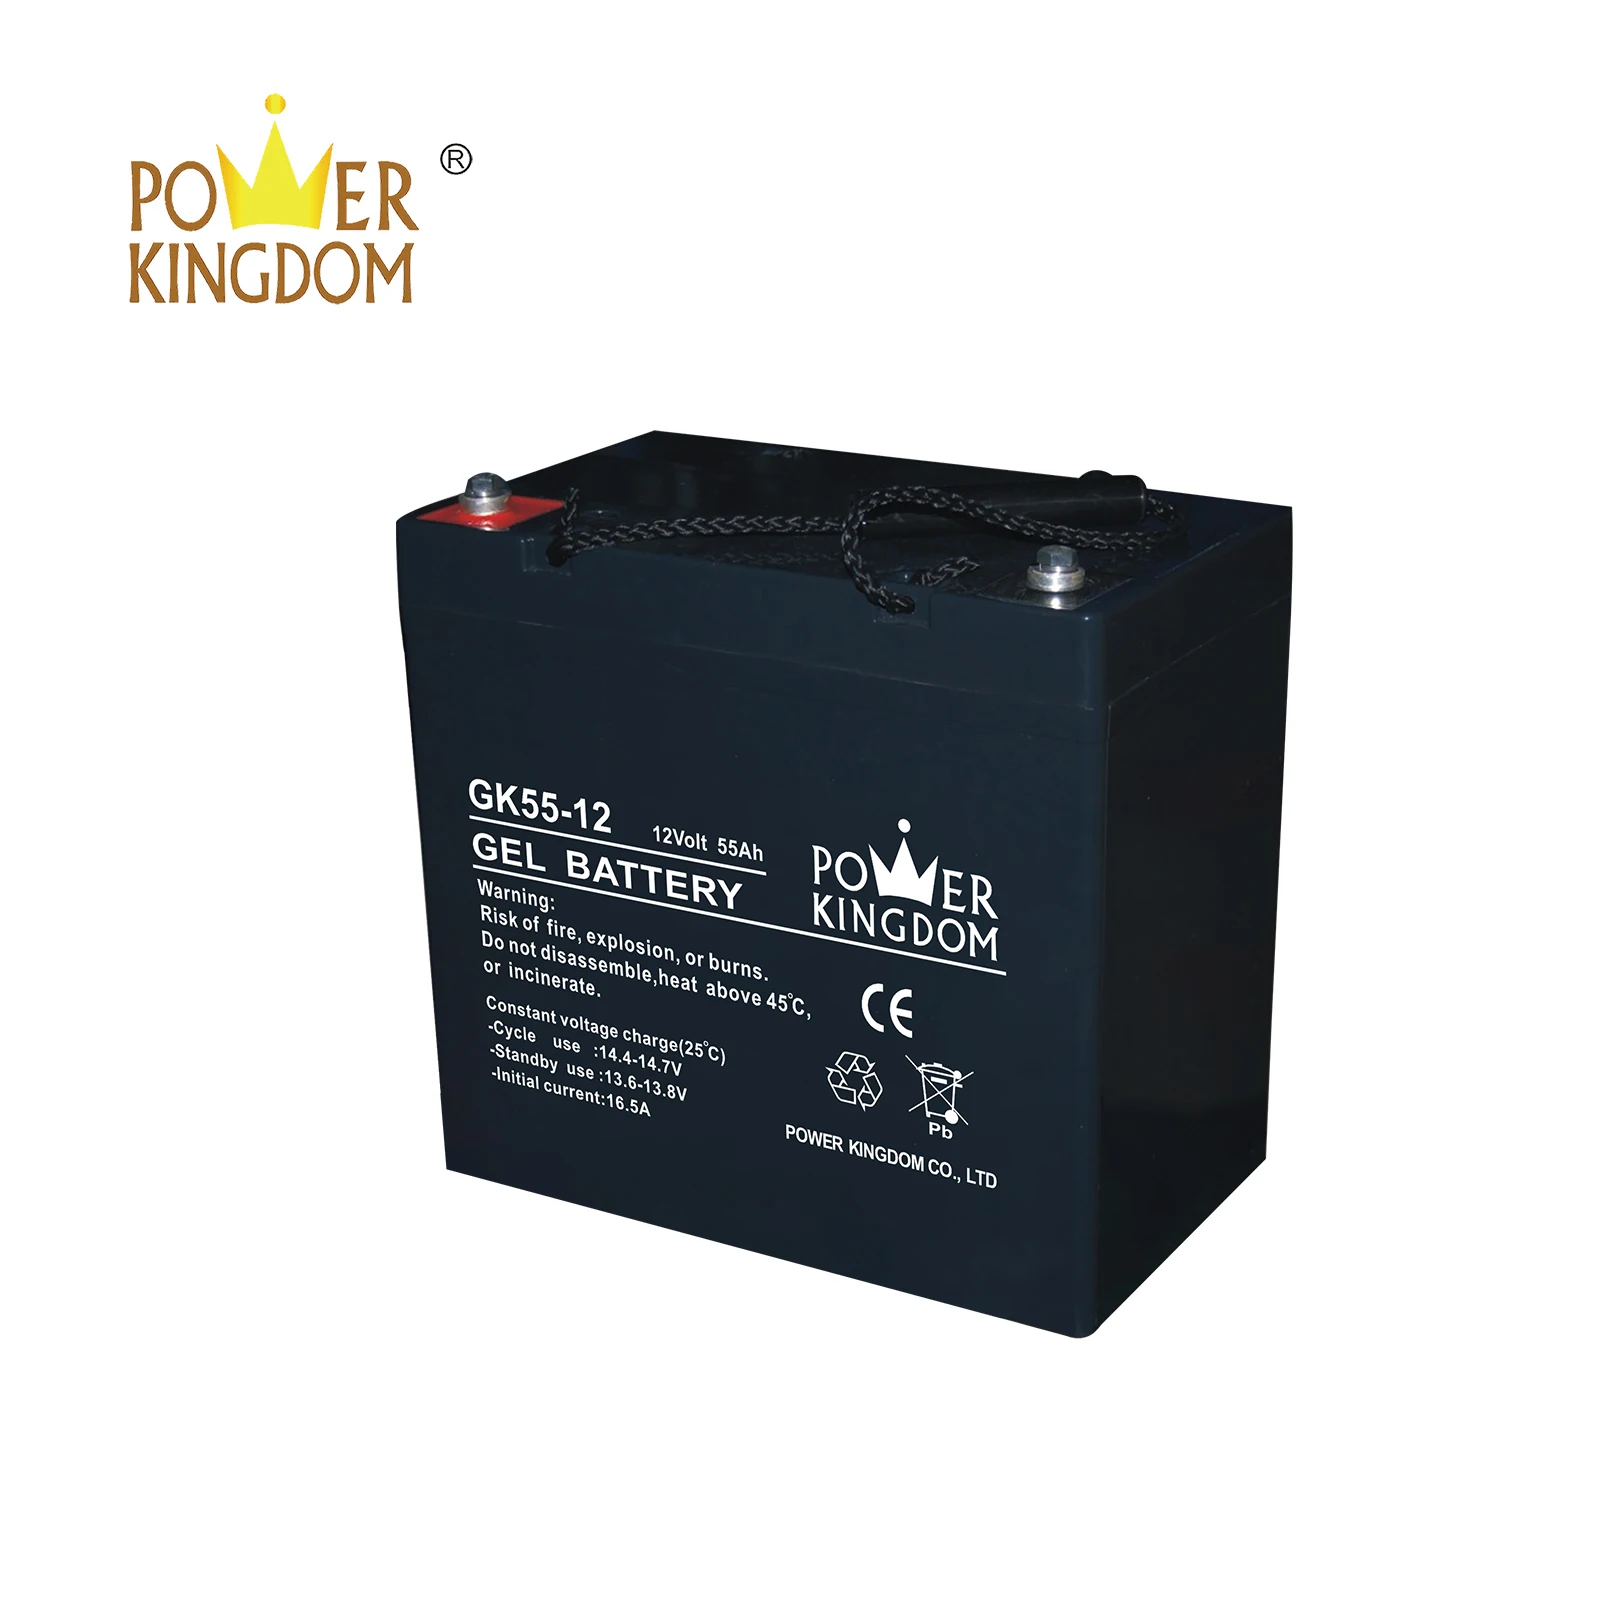 Power Kingdom industrial ups inquire now medical equipment